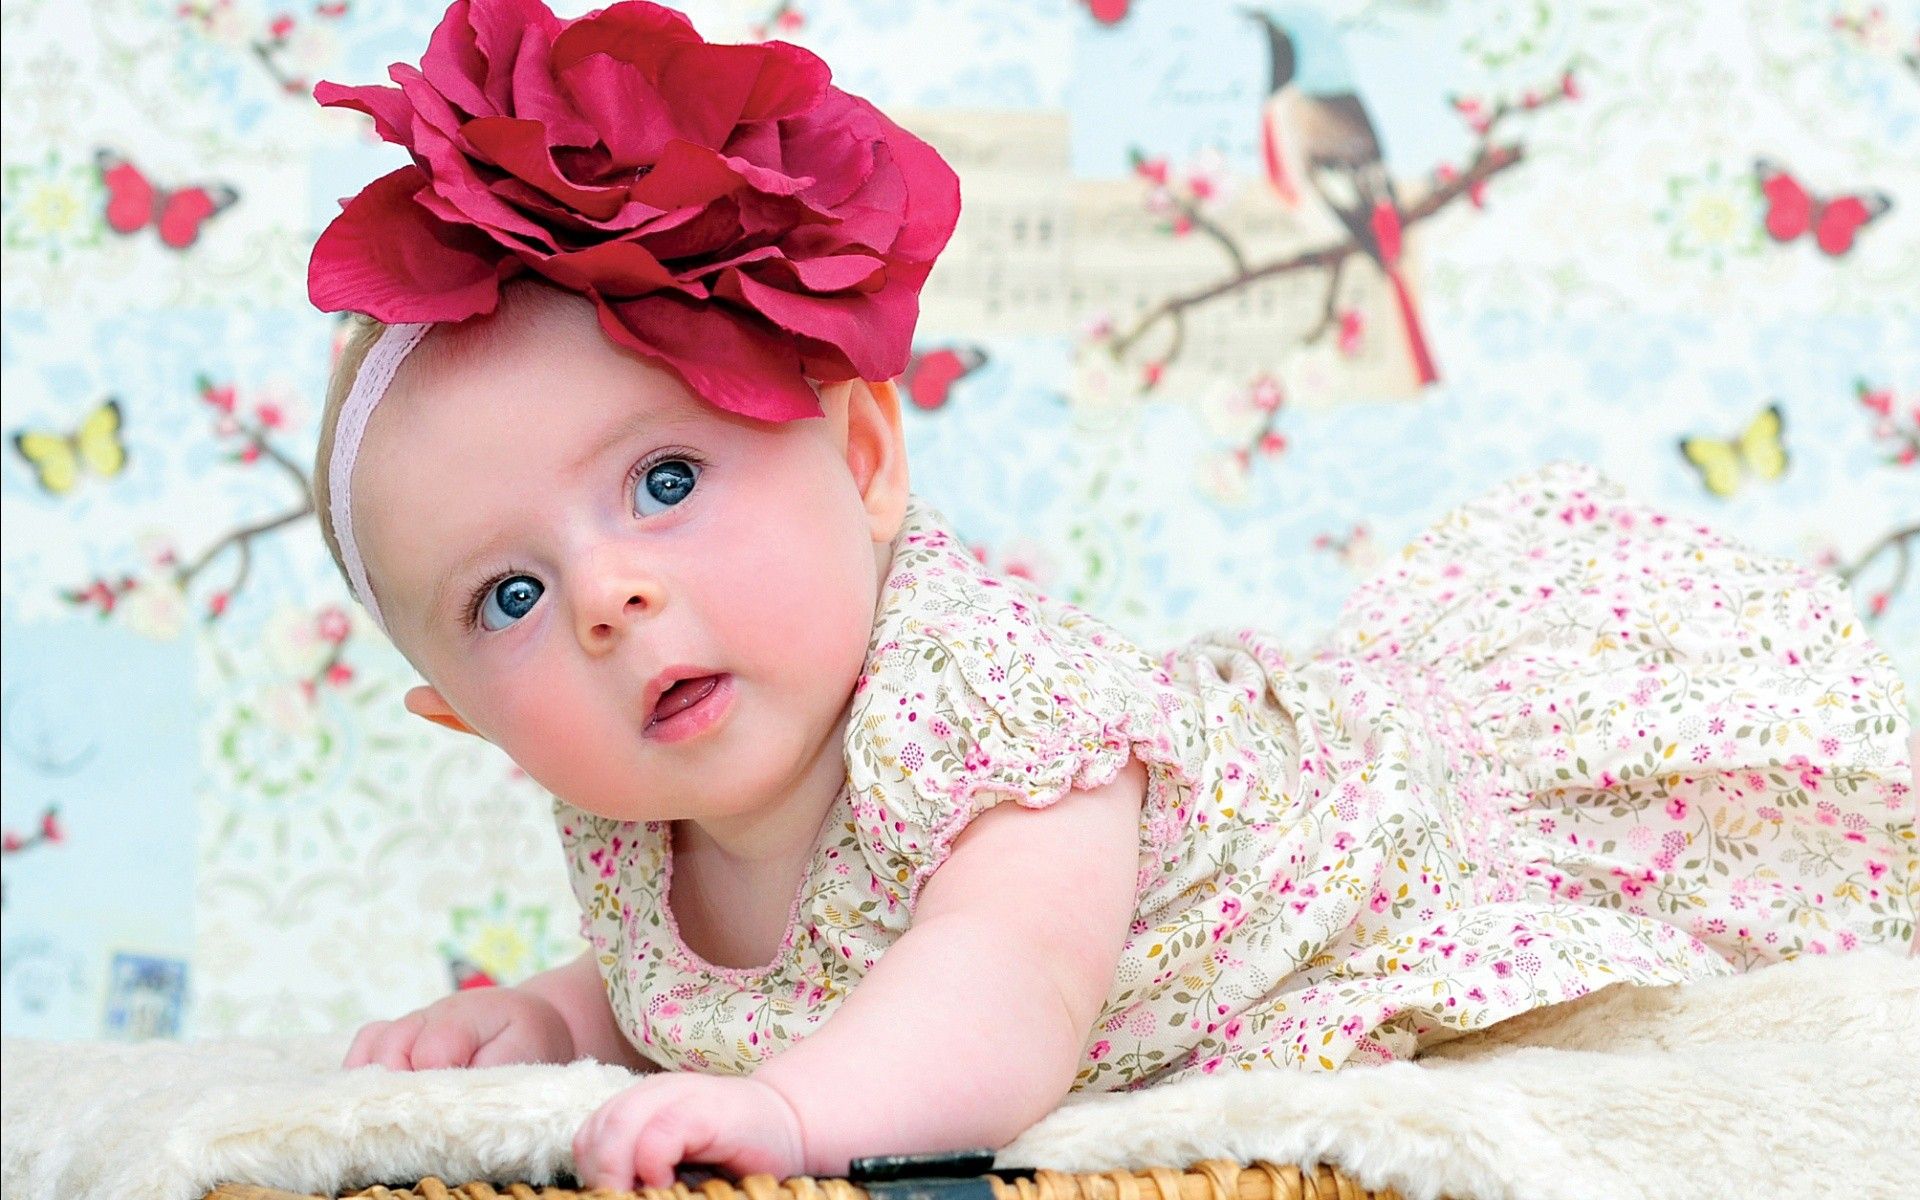 Cute Cute Child Flowers Wallpapers - Baby Girl Wallpapers Free Download - HD Wallpaper 